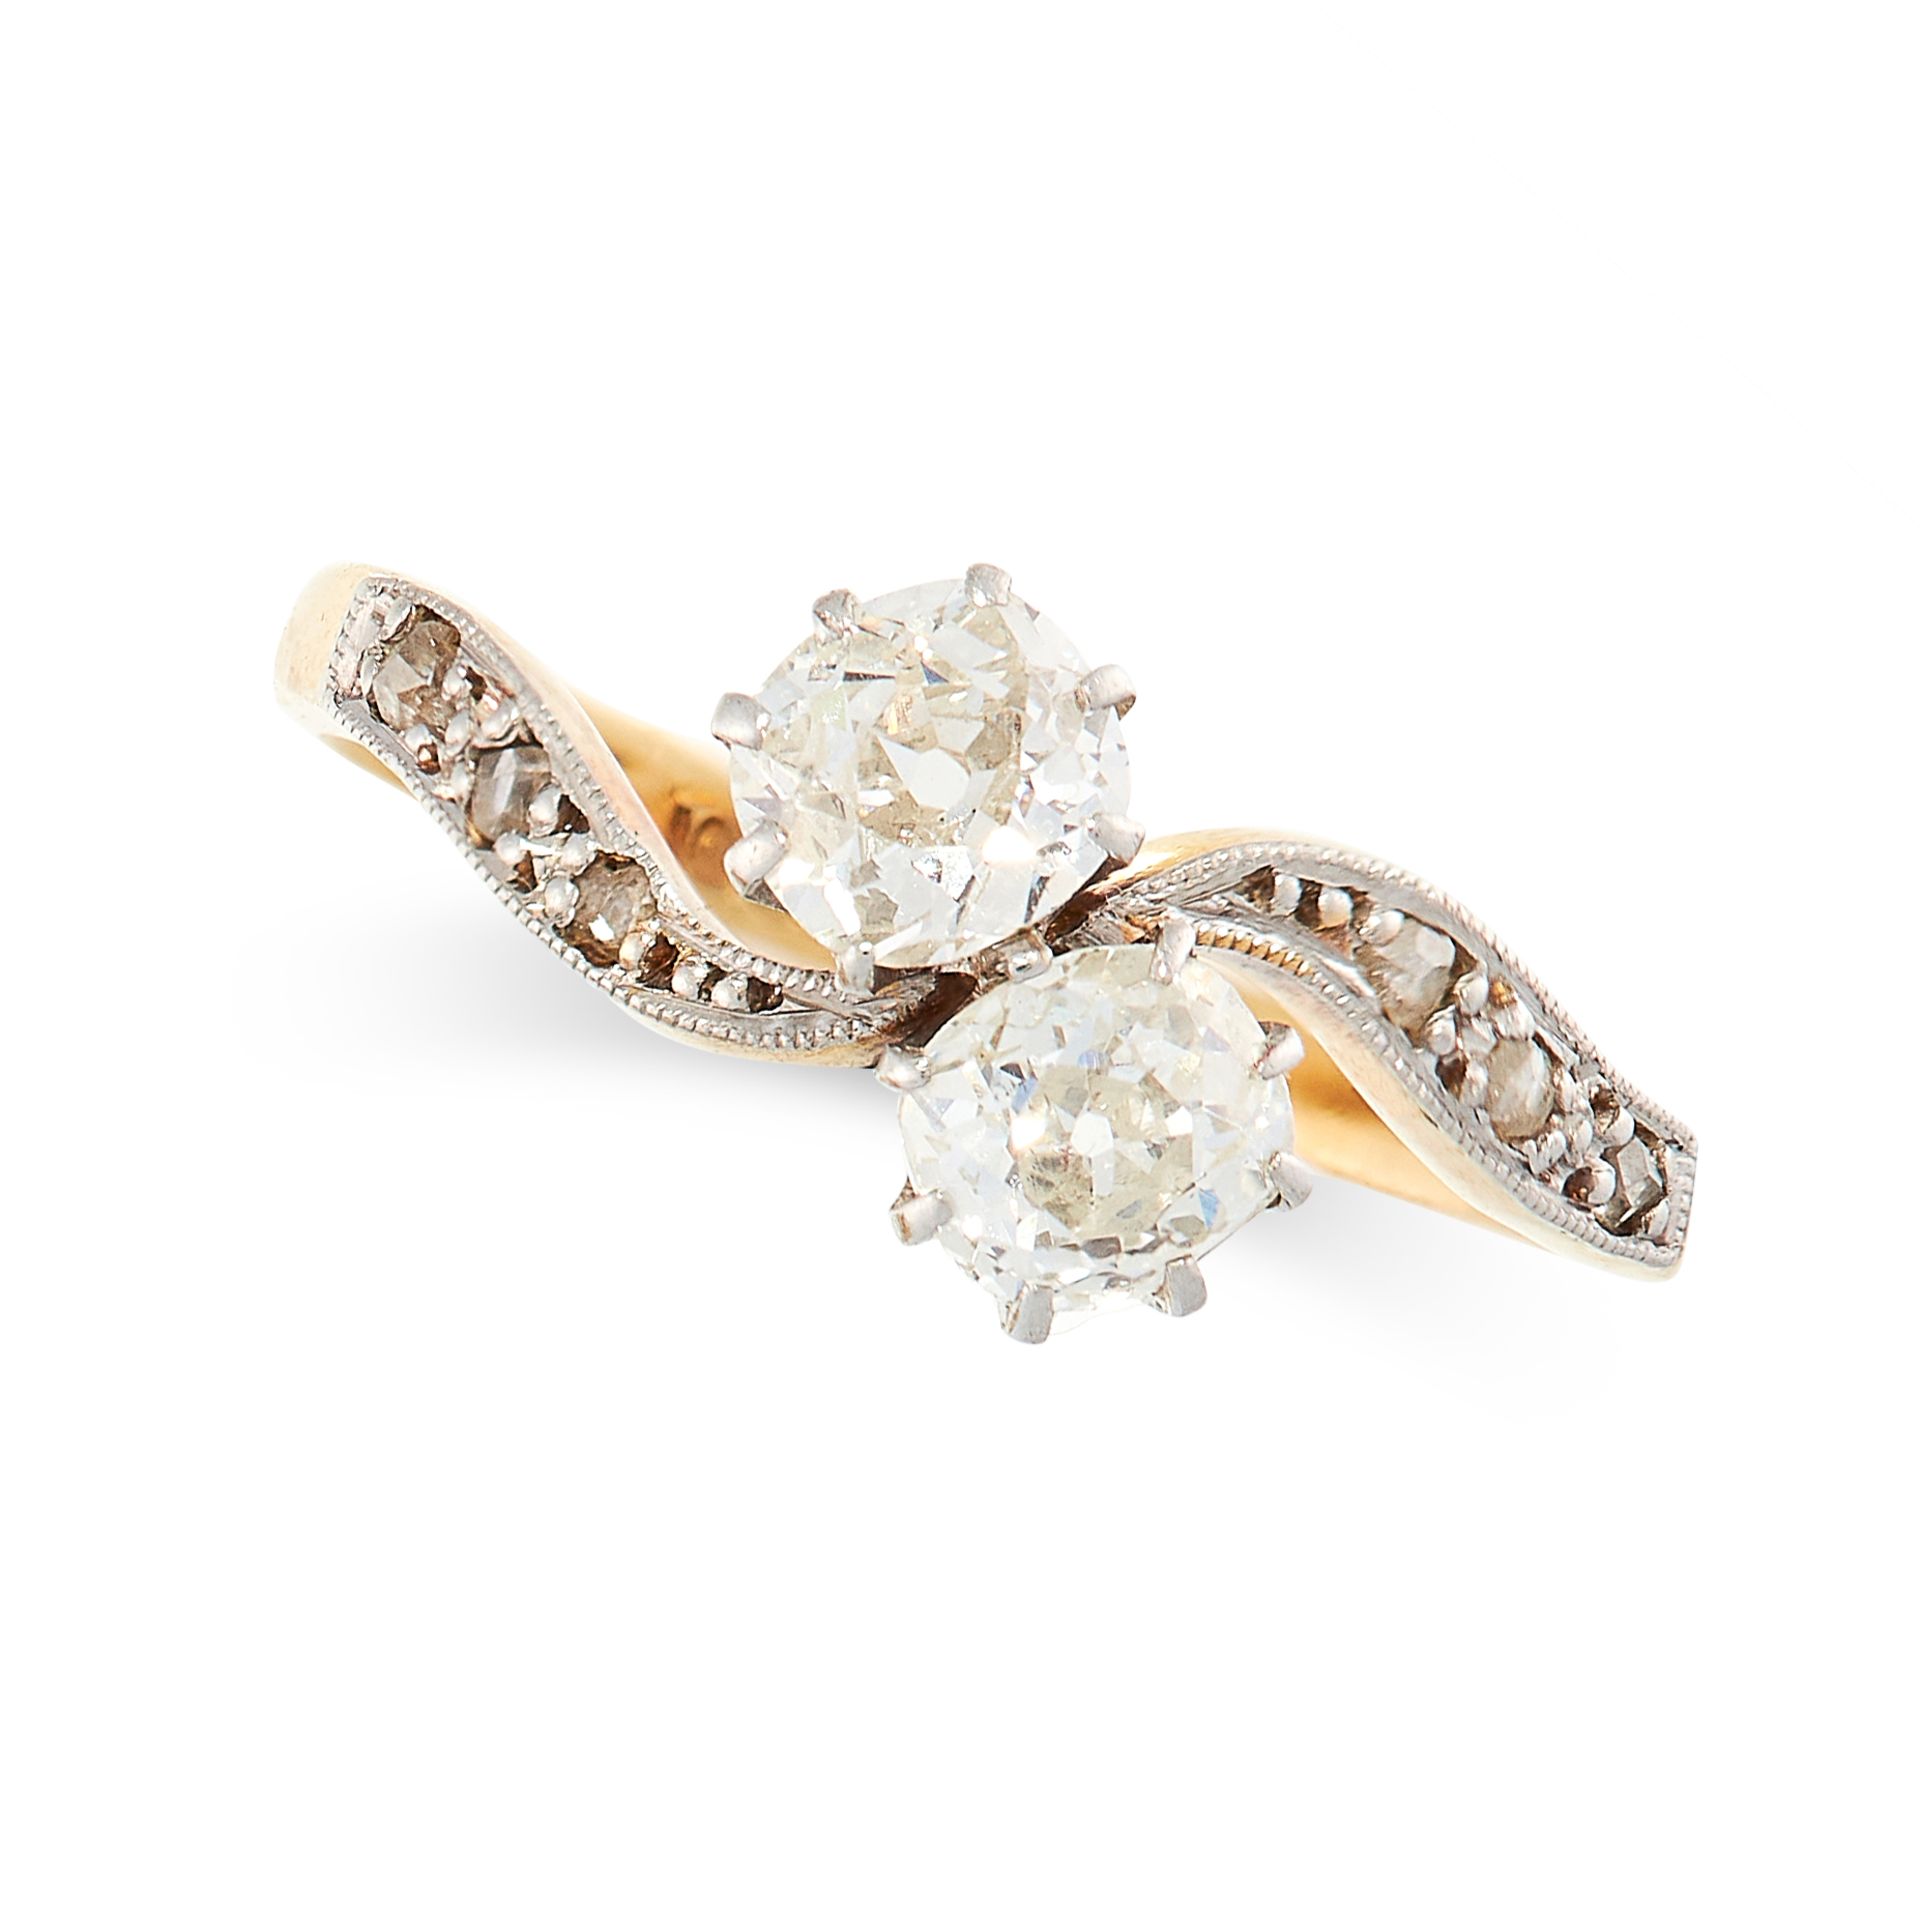 DIAMOND TOI ET MOI DRESS RING, EARLY 20TH CENTURY mounted in 18ct yellow gold and platinum, set with